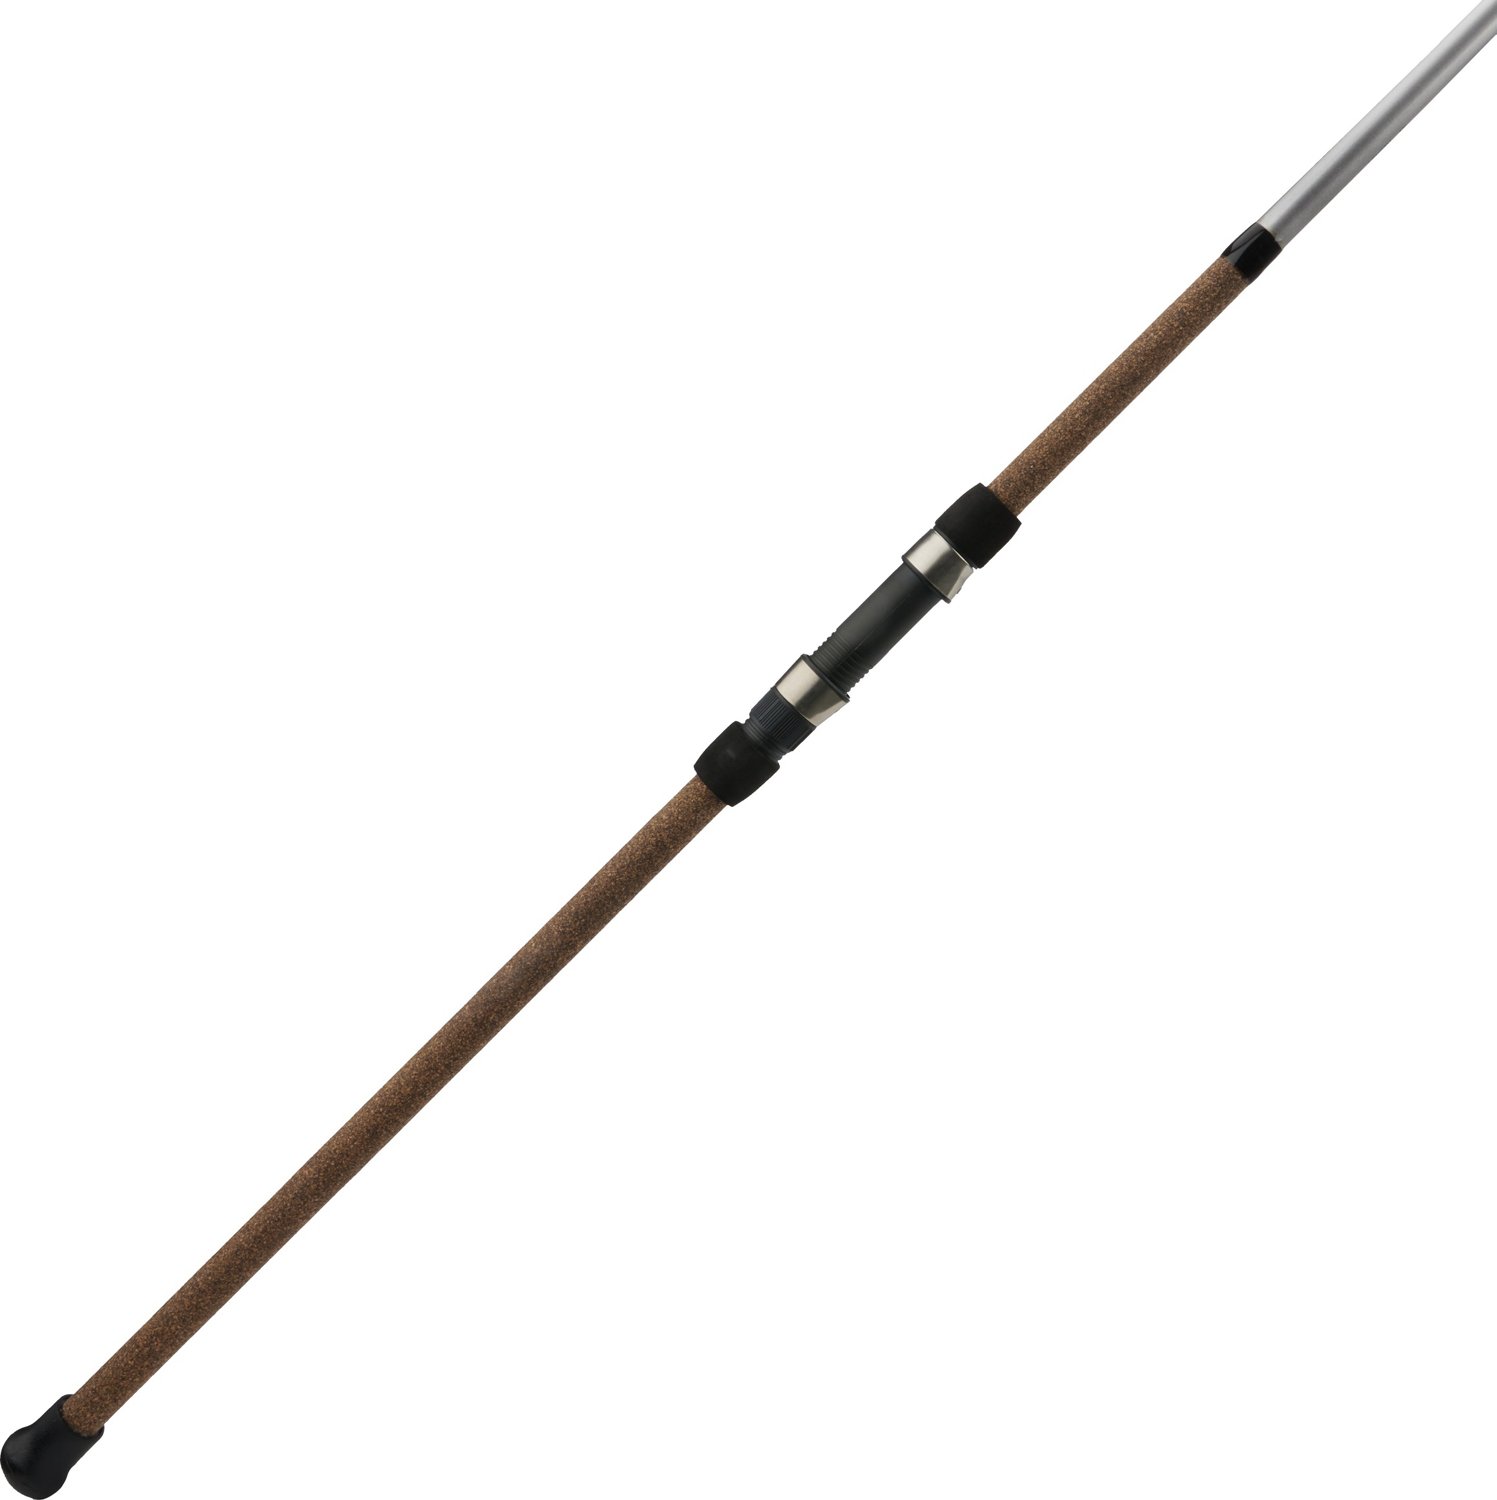 Waterloo Rod Company Salinity 7 ft M Spinning Rod, 1 - Spinning and Ultralght Rods at Academy Sports